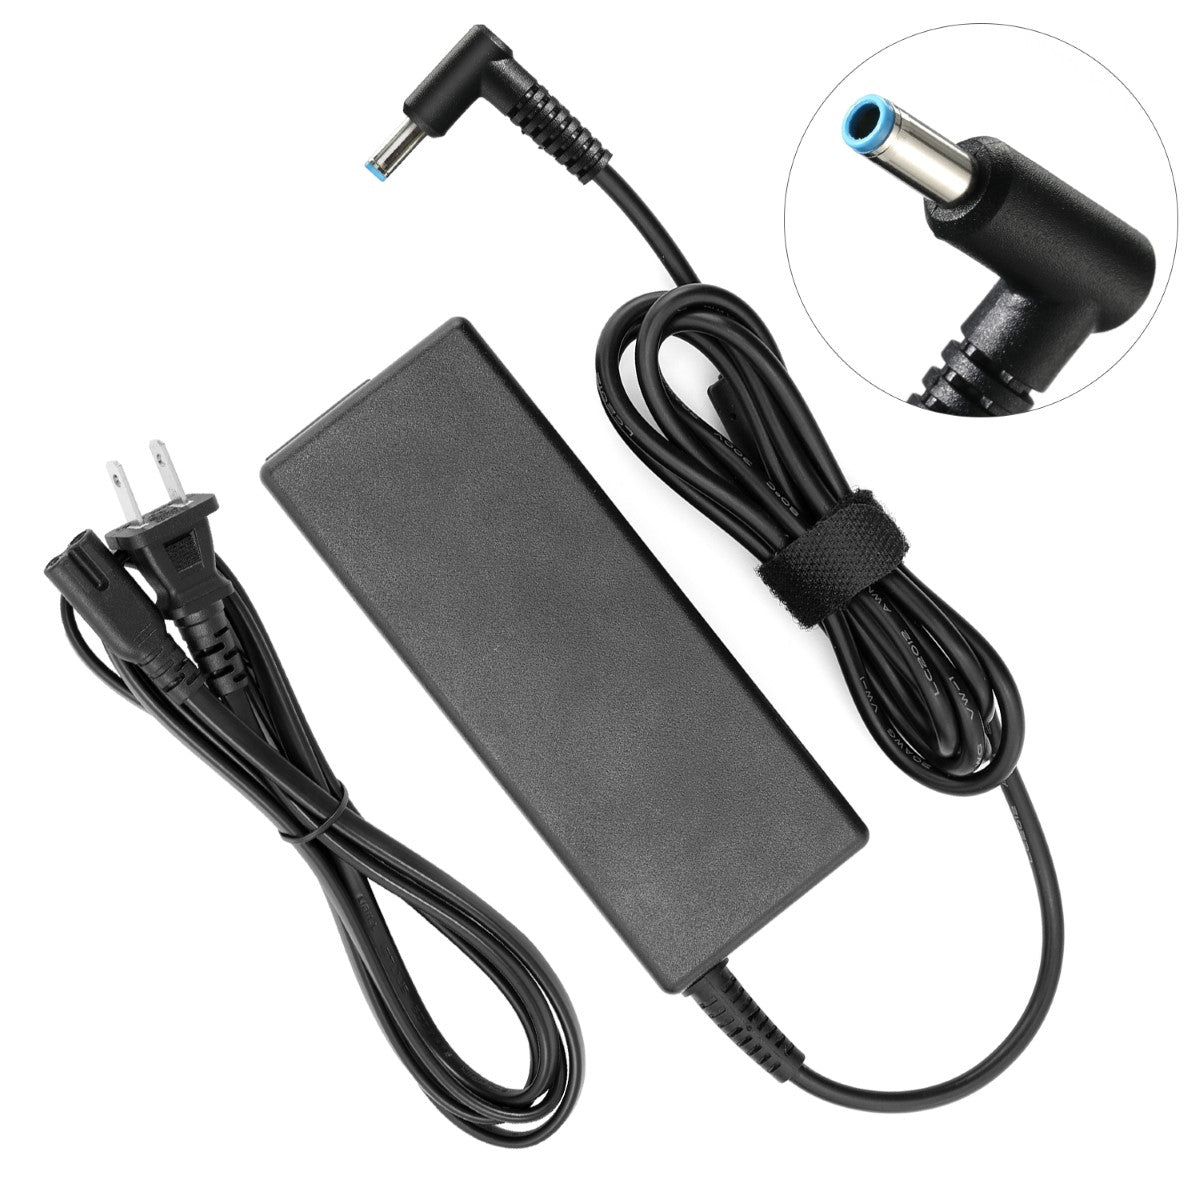 AC Adapter Charger for hp Envy Touchsmart 15-k012nr Notebook.